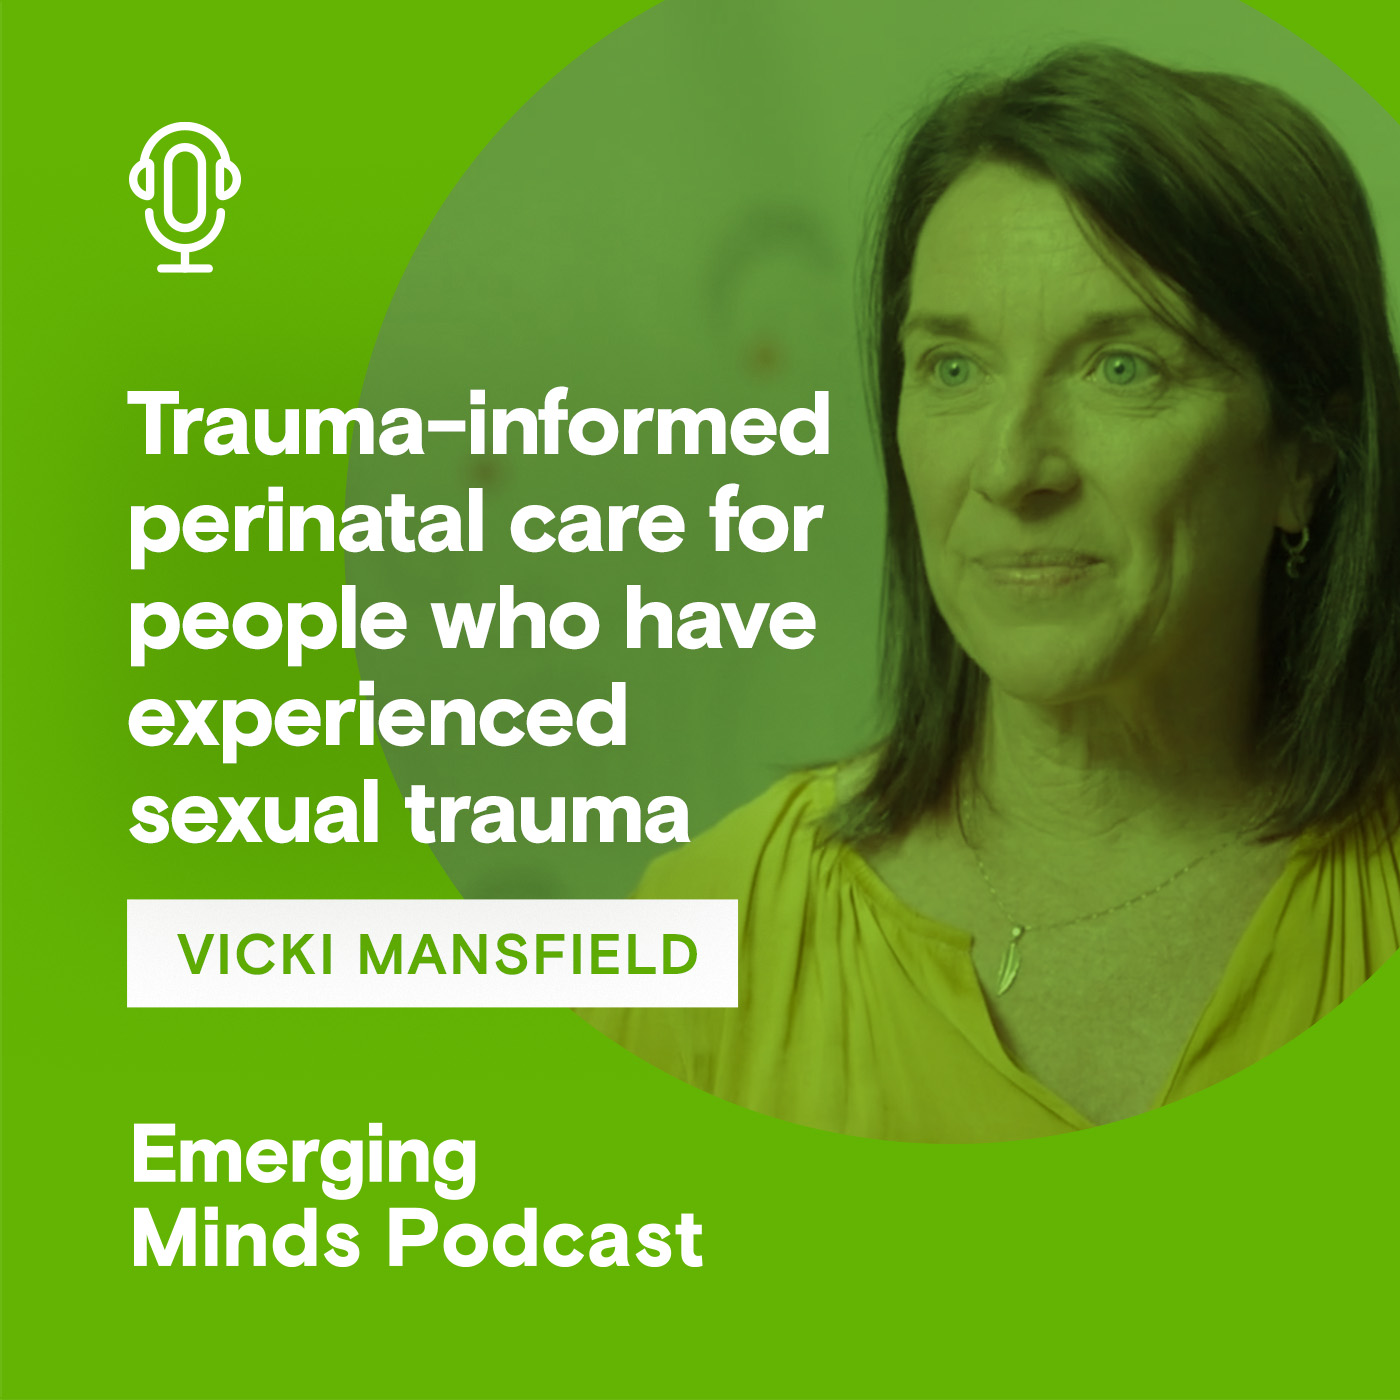 Trauma-informed perinatal care for people who have experienced sexual trauma